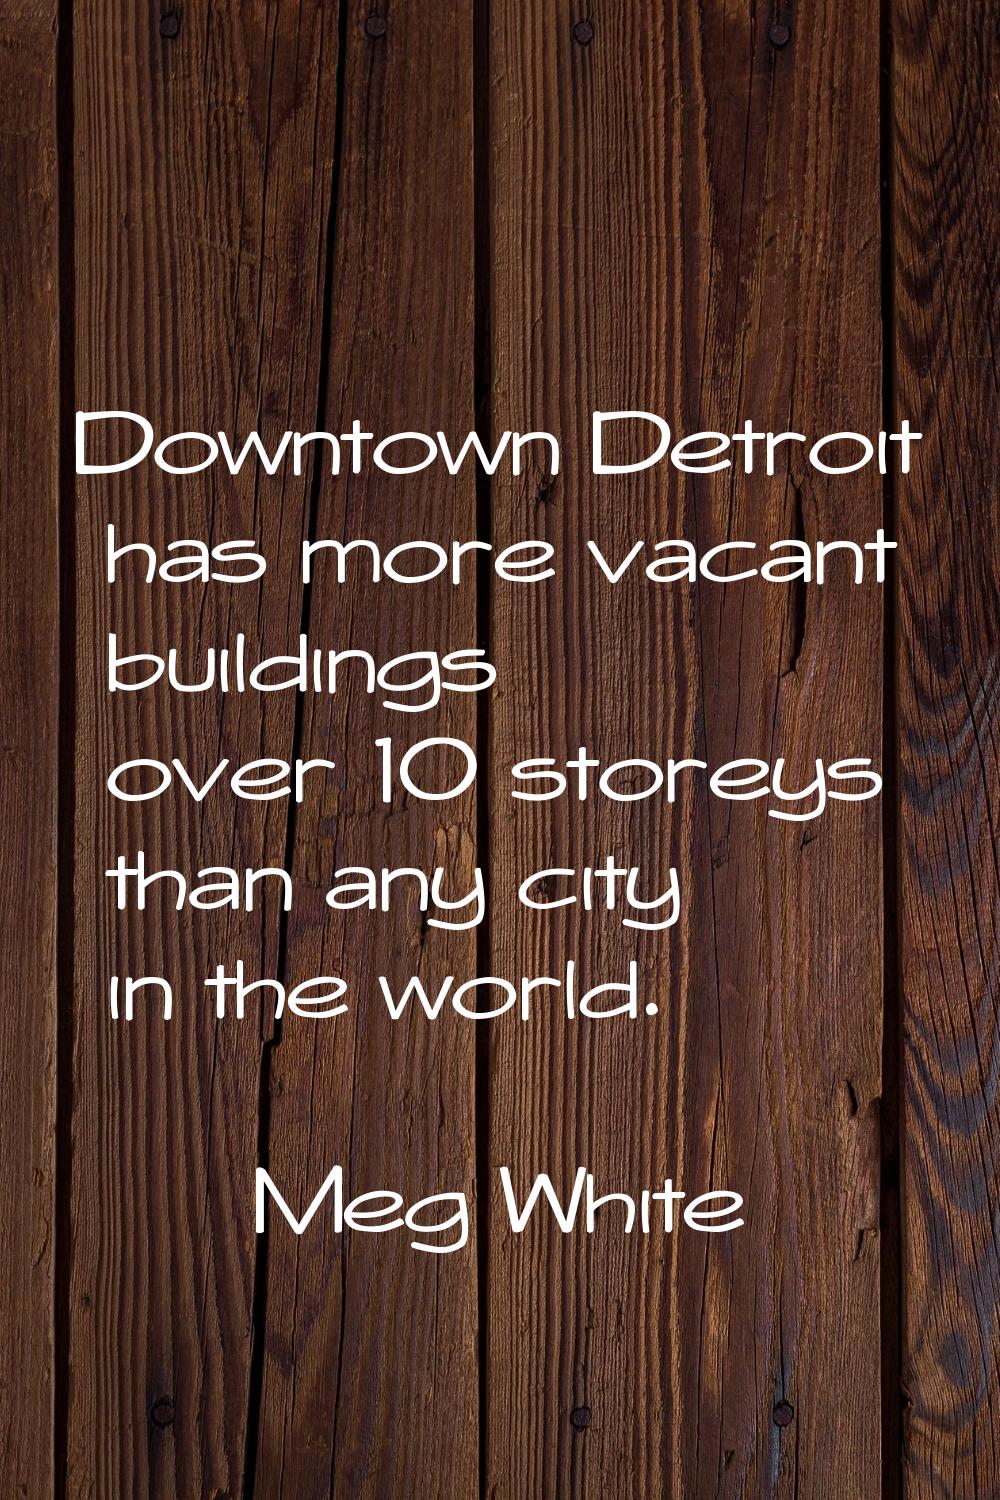 Downtown Detroit has more vacant buildings over 10 storeys than any city in the world.